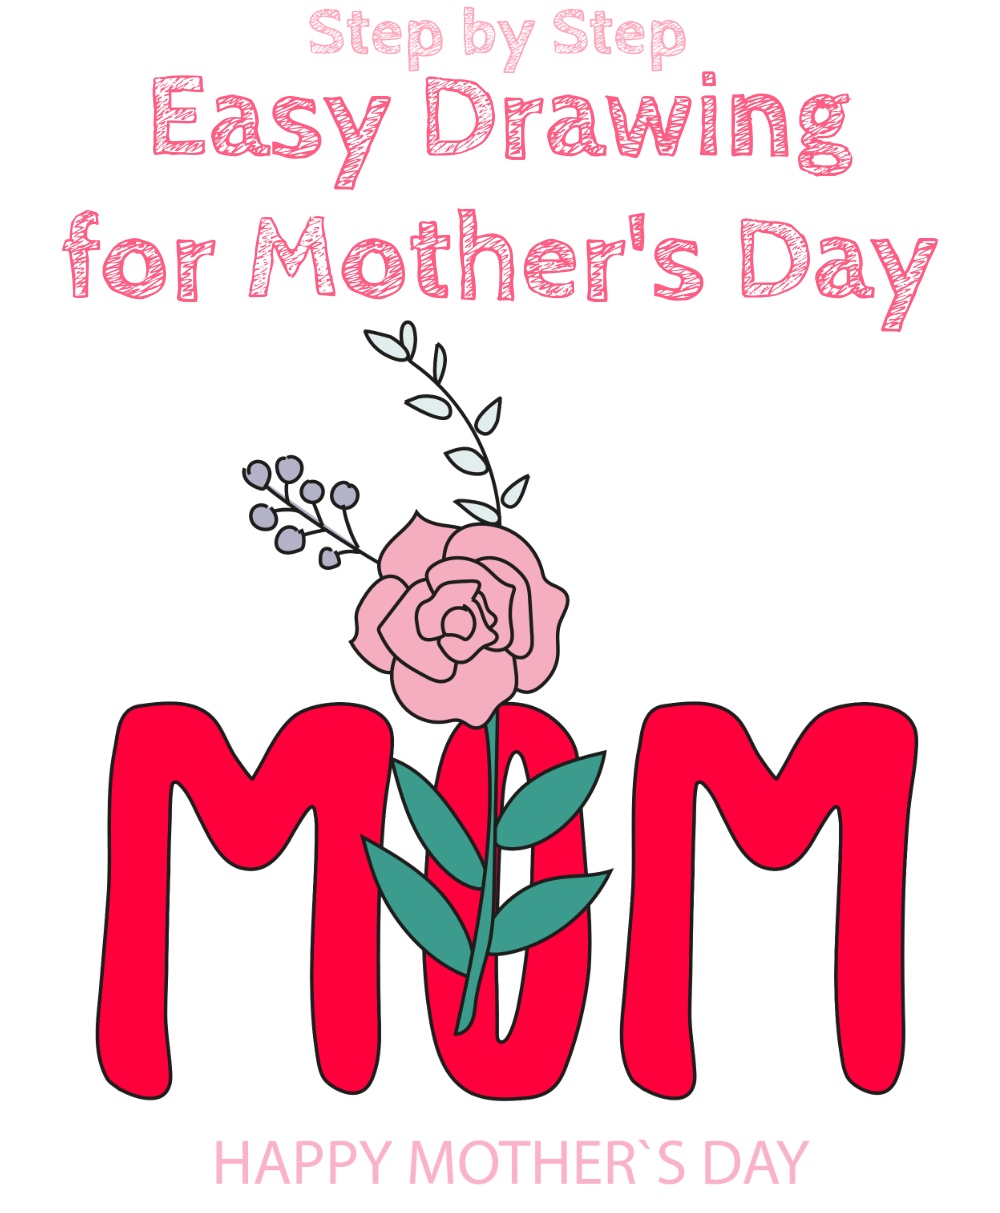 Easy Drawing for Mother's Day